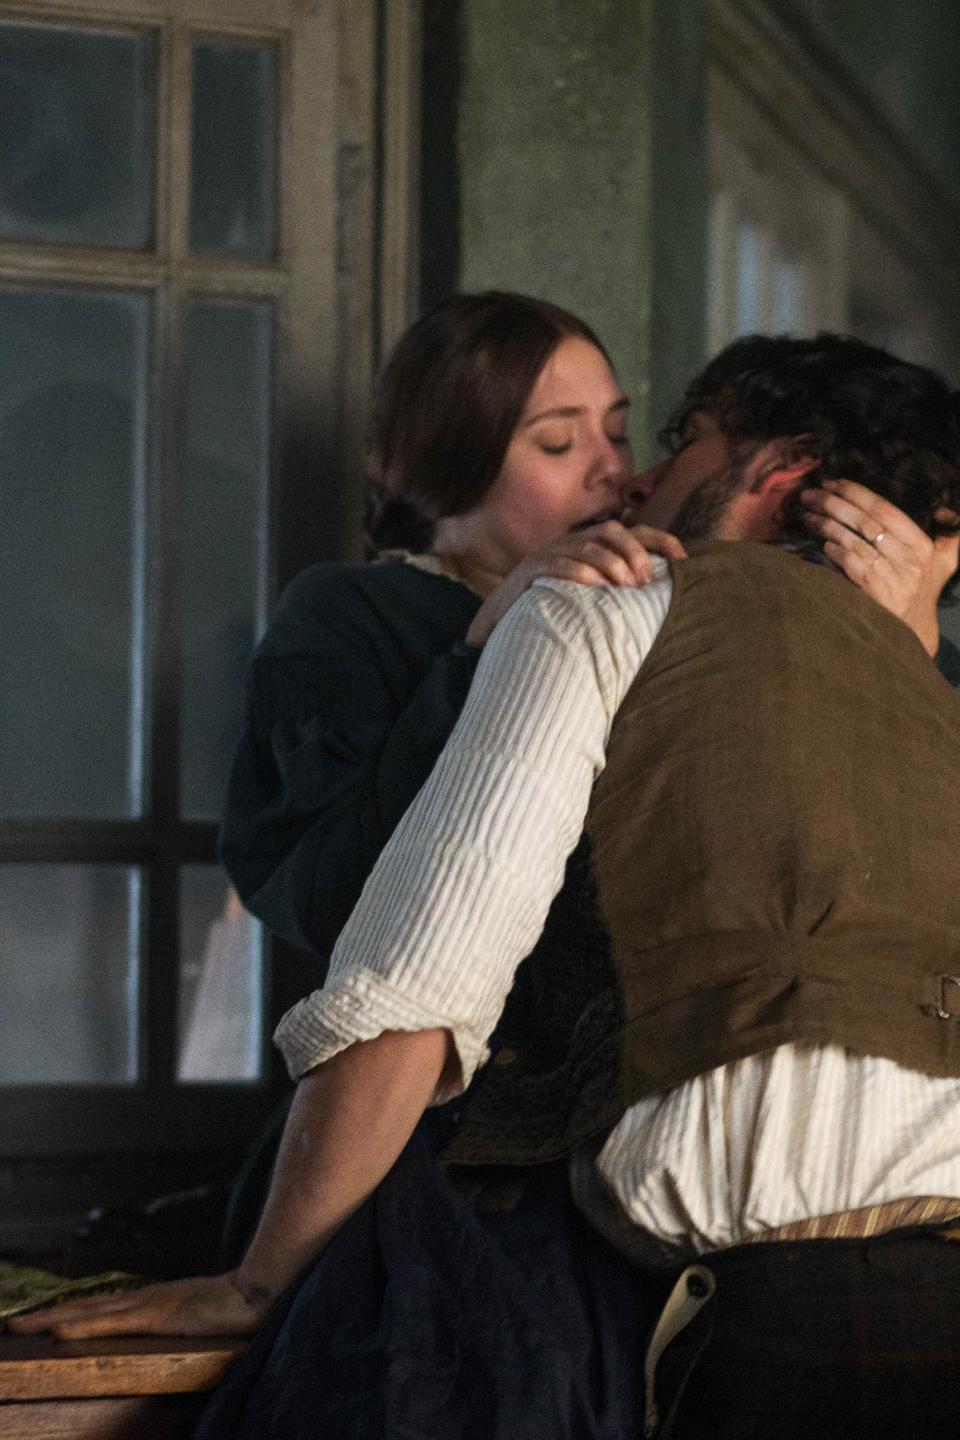 This photo released by Roadside Attractions shows Elizabeth Olsen, left, as Therese Raquin and Oscar Isaac, as Laurent LeClaire, in director and screenwriter, Charlie Stratton's film, "In Secret." The story is based on Emile Zola's novel, "Therese Raquin." (AP Photo/Roadside Attractions, Phil Bray)